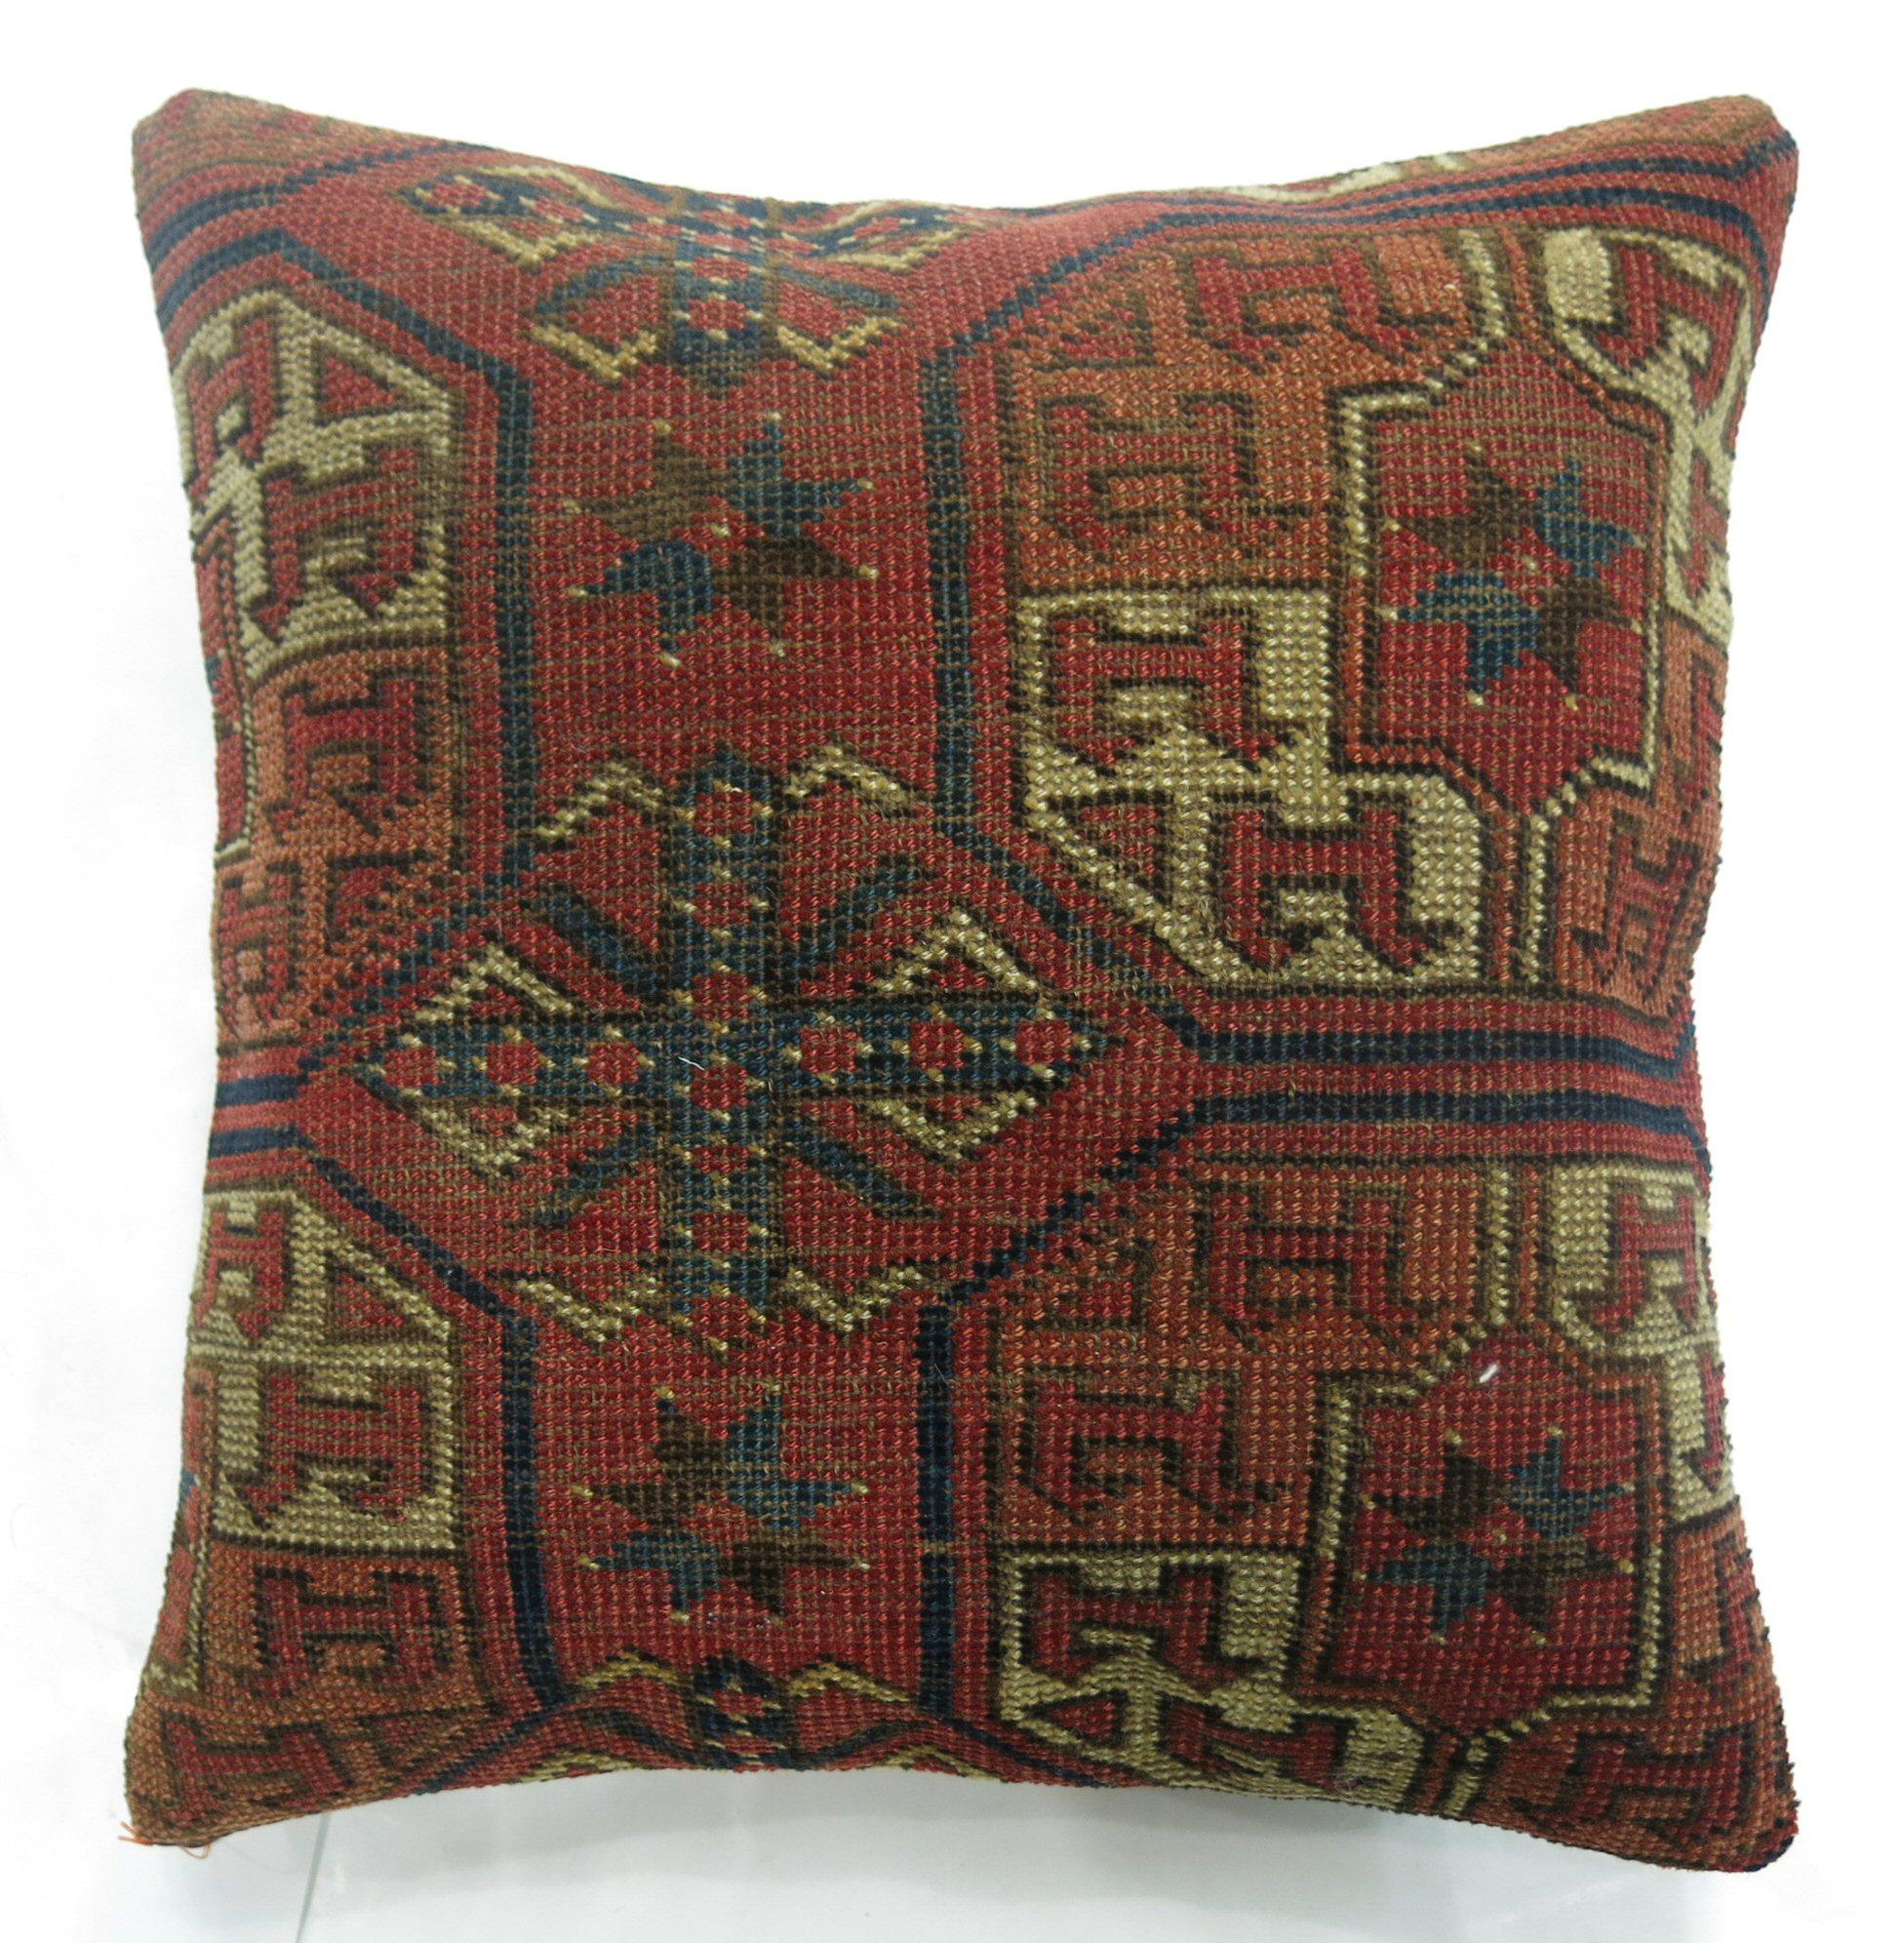 Pillow made from a 19th-century afghan Turkeman rug.

16'' x 16''.